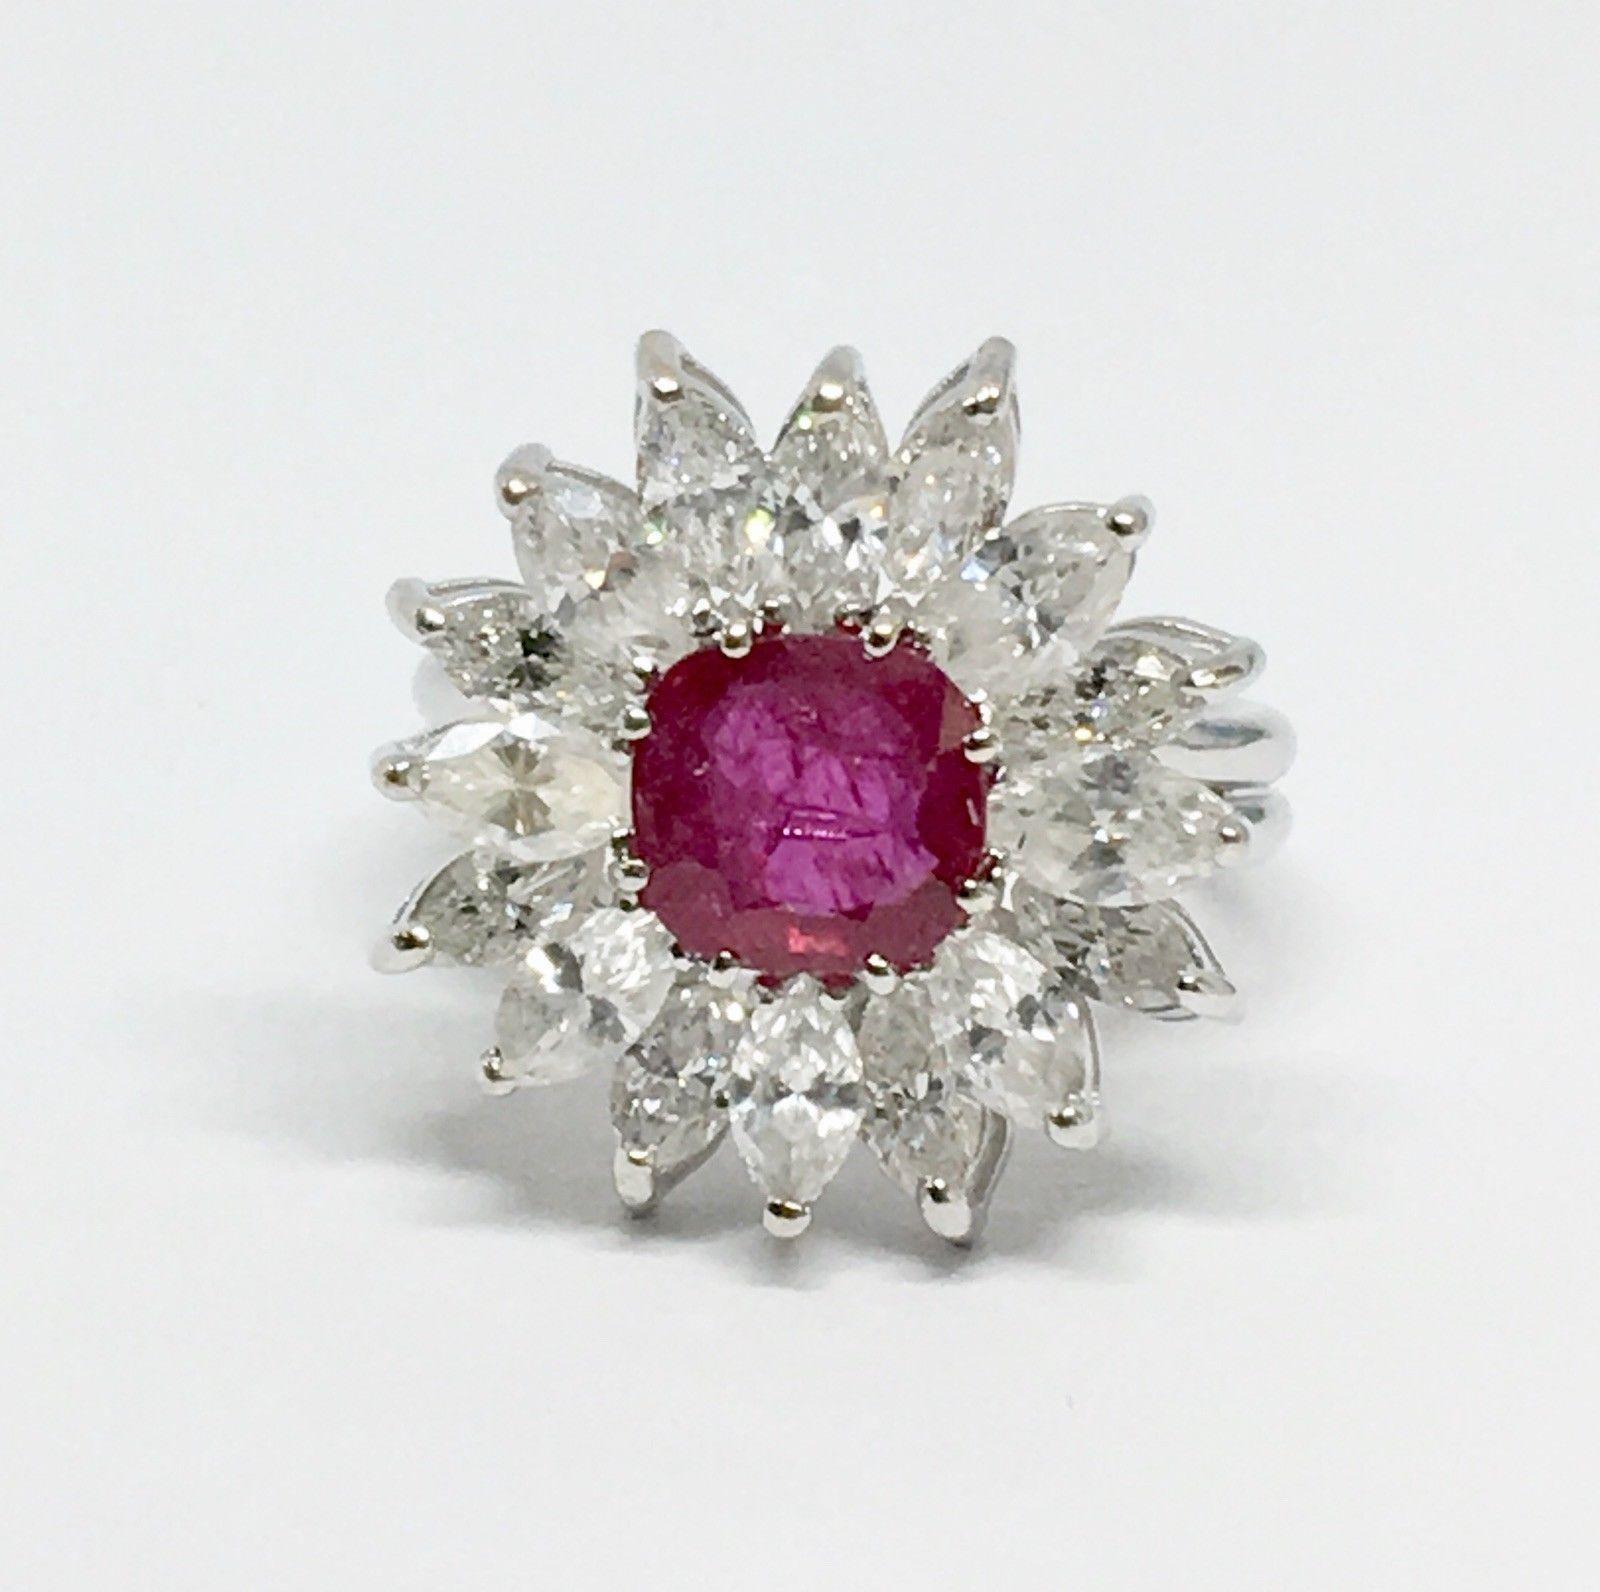 Retro Midcentury 1950s 4.30 Carat Red Ruby VS Diamond Halo Cluster Cocktail Ring 2